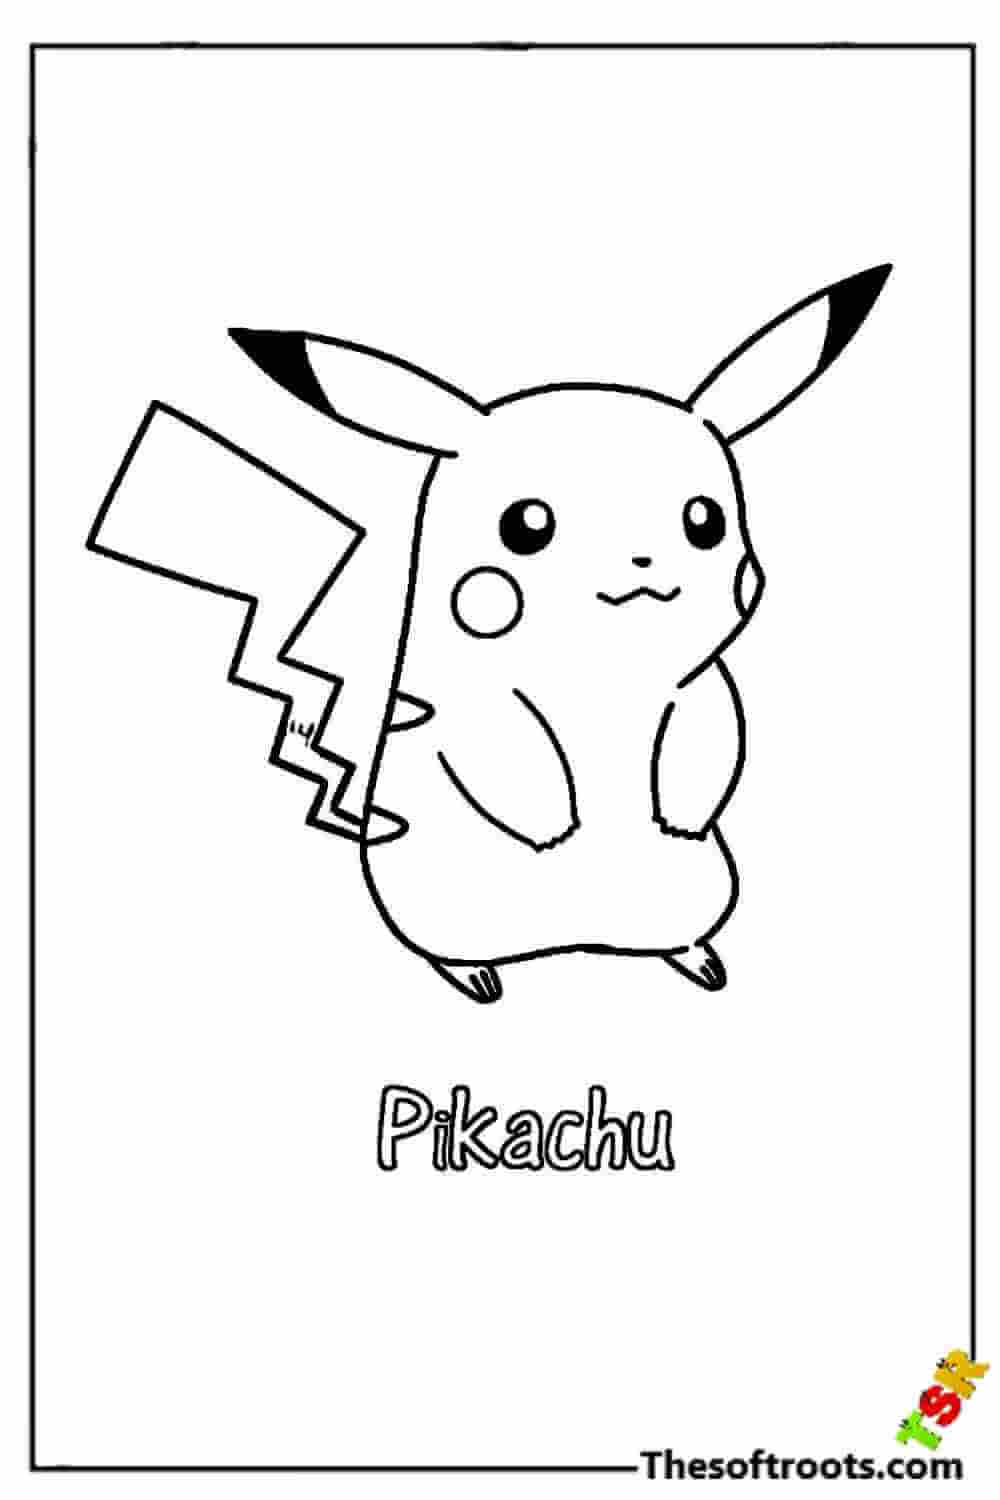 Spell the word Pikachu coloring pages